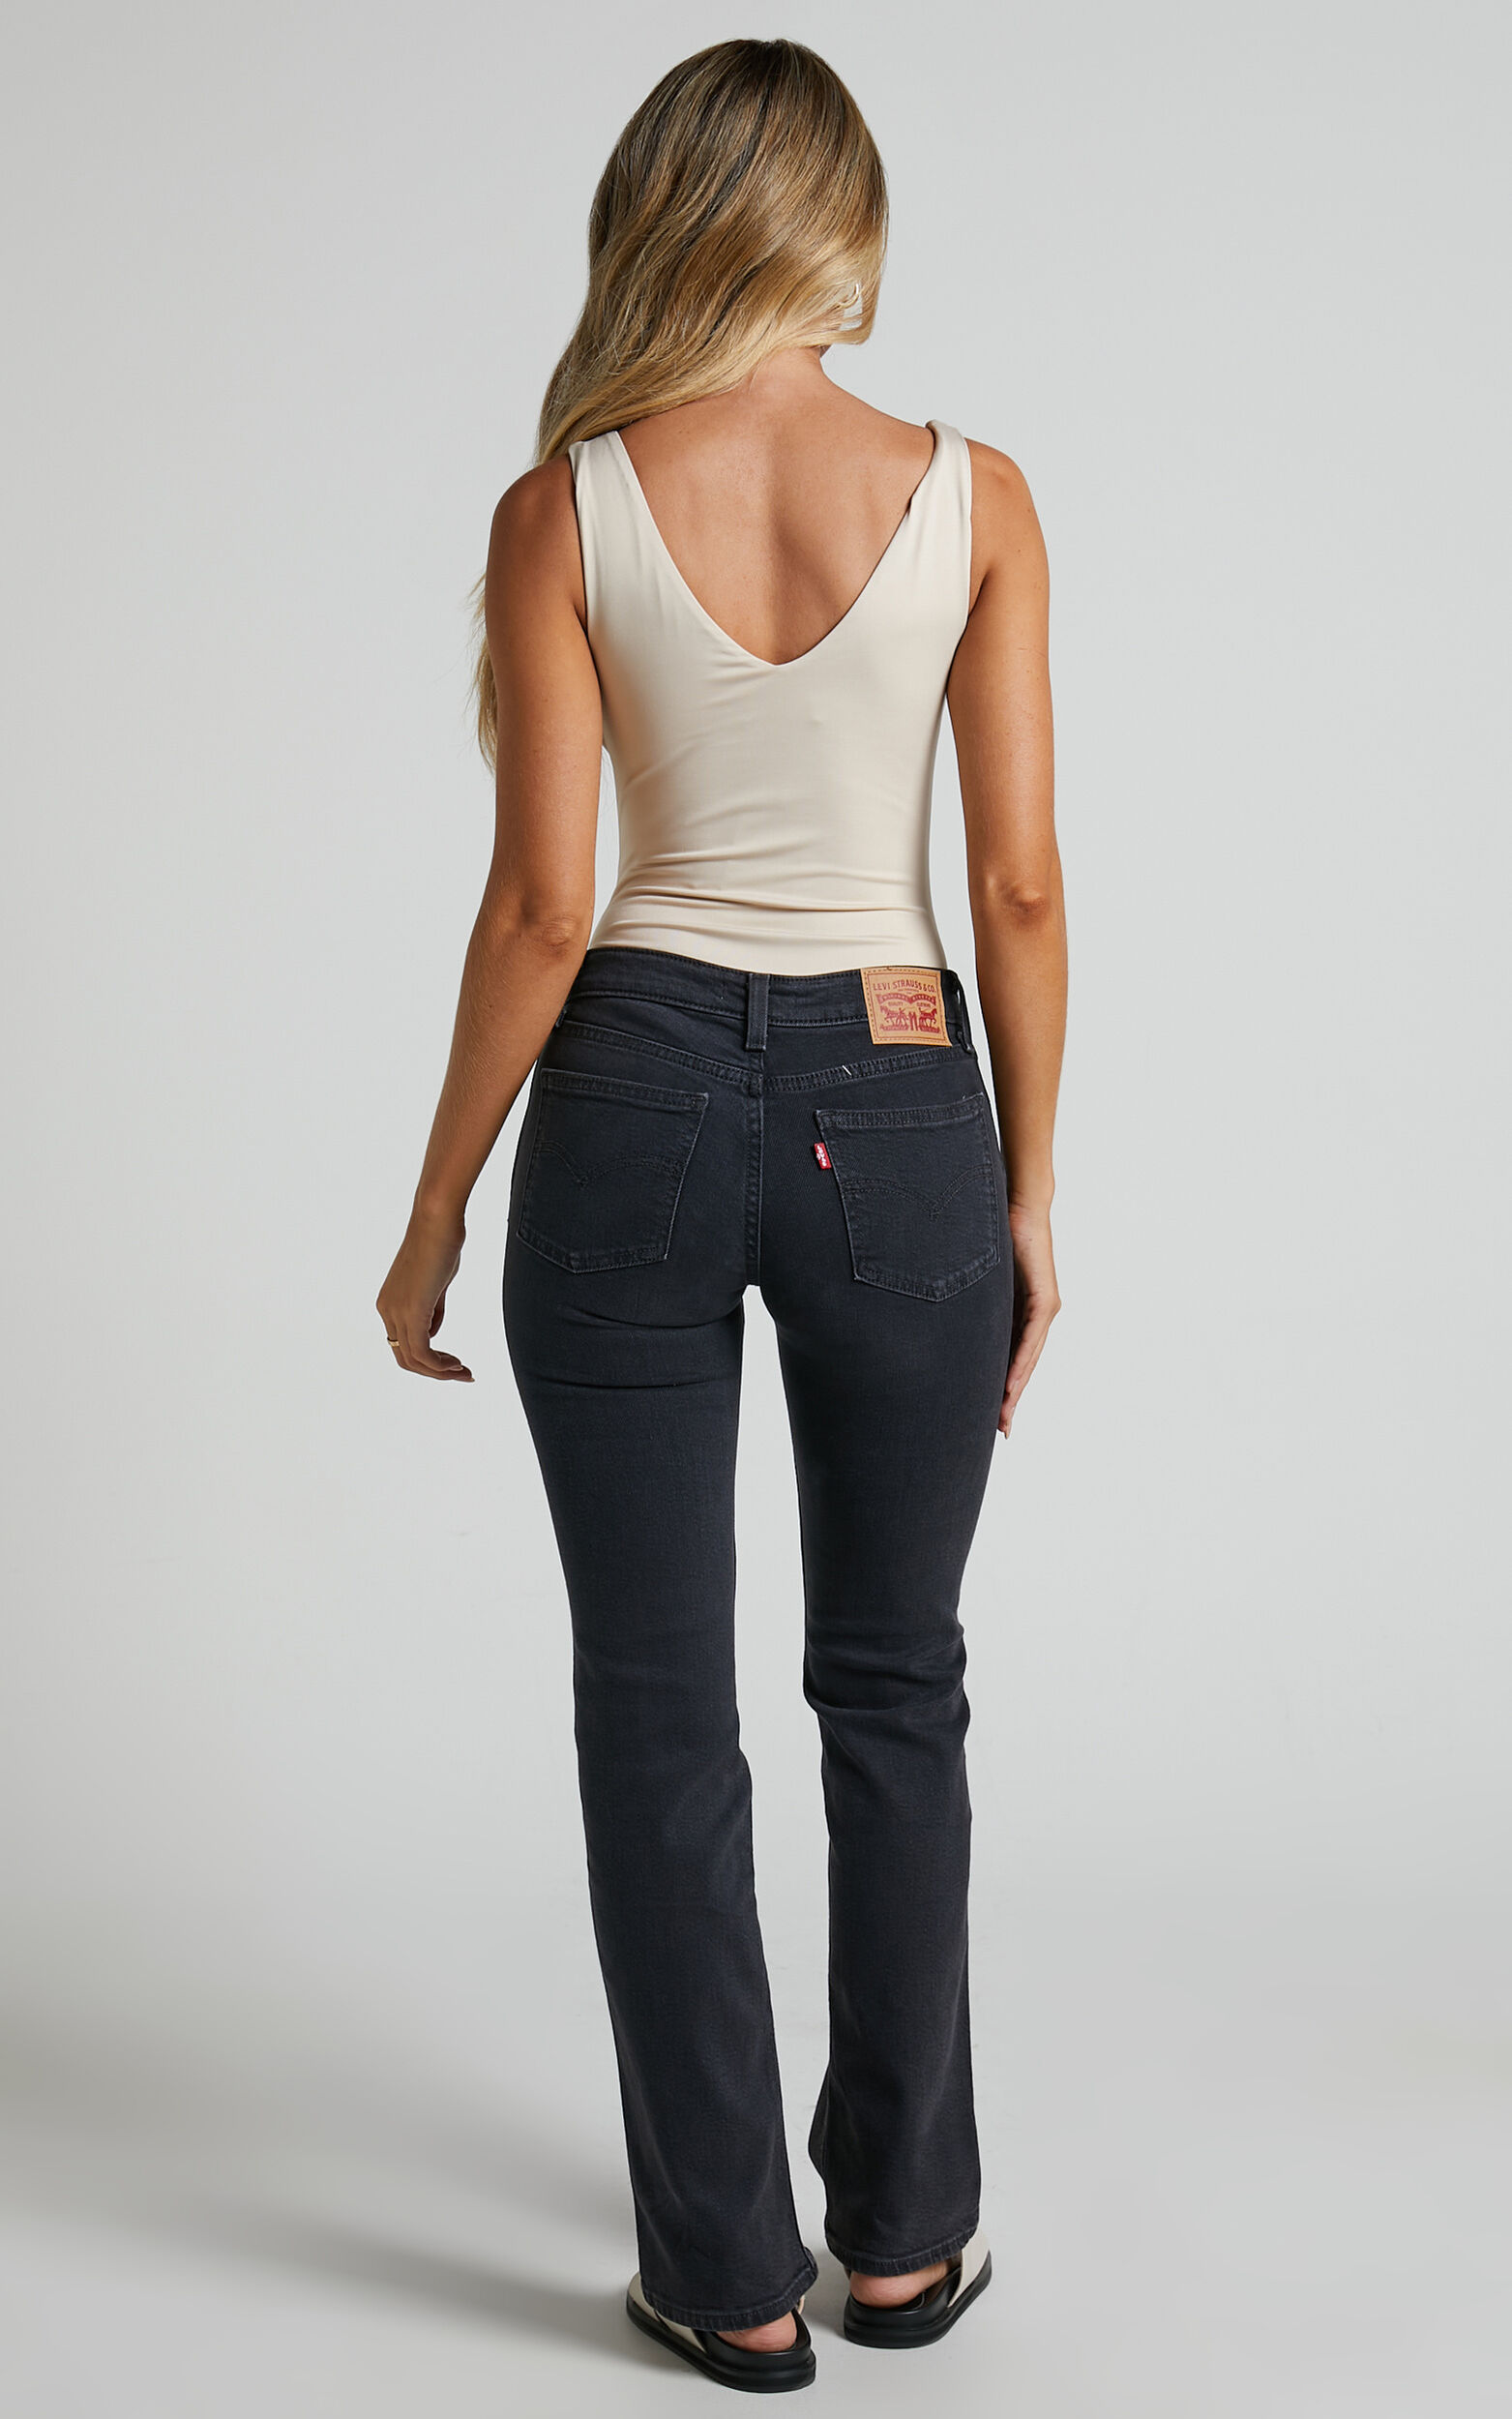 Levi's - Superlow Boot Jeans in First Or Last | Showpo